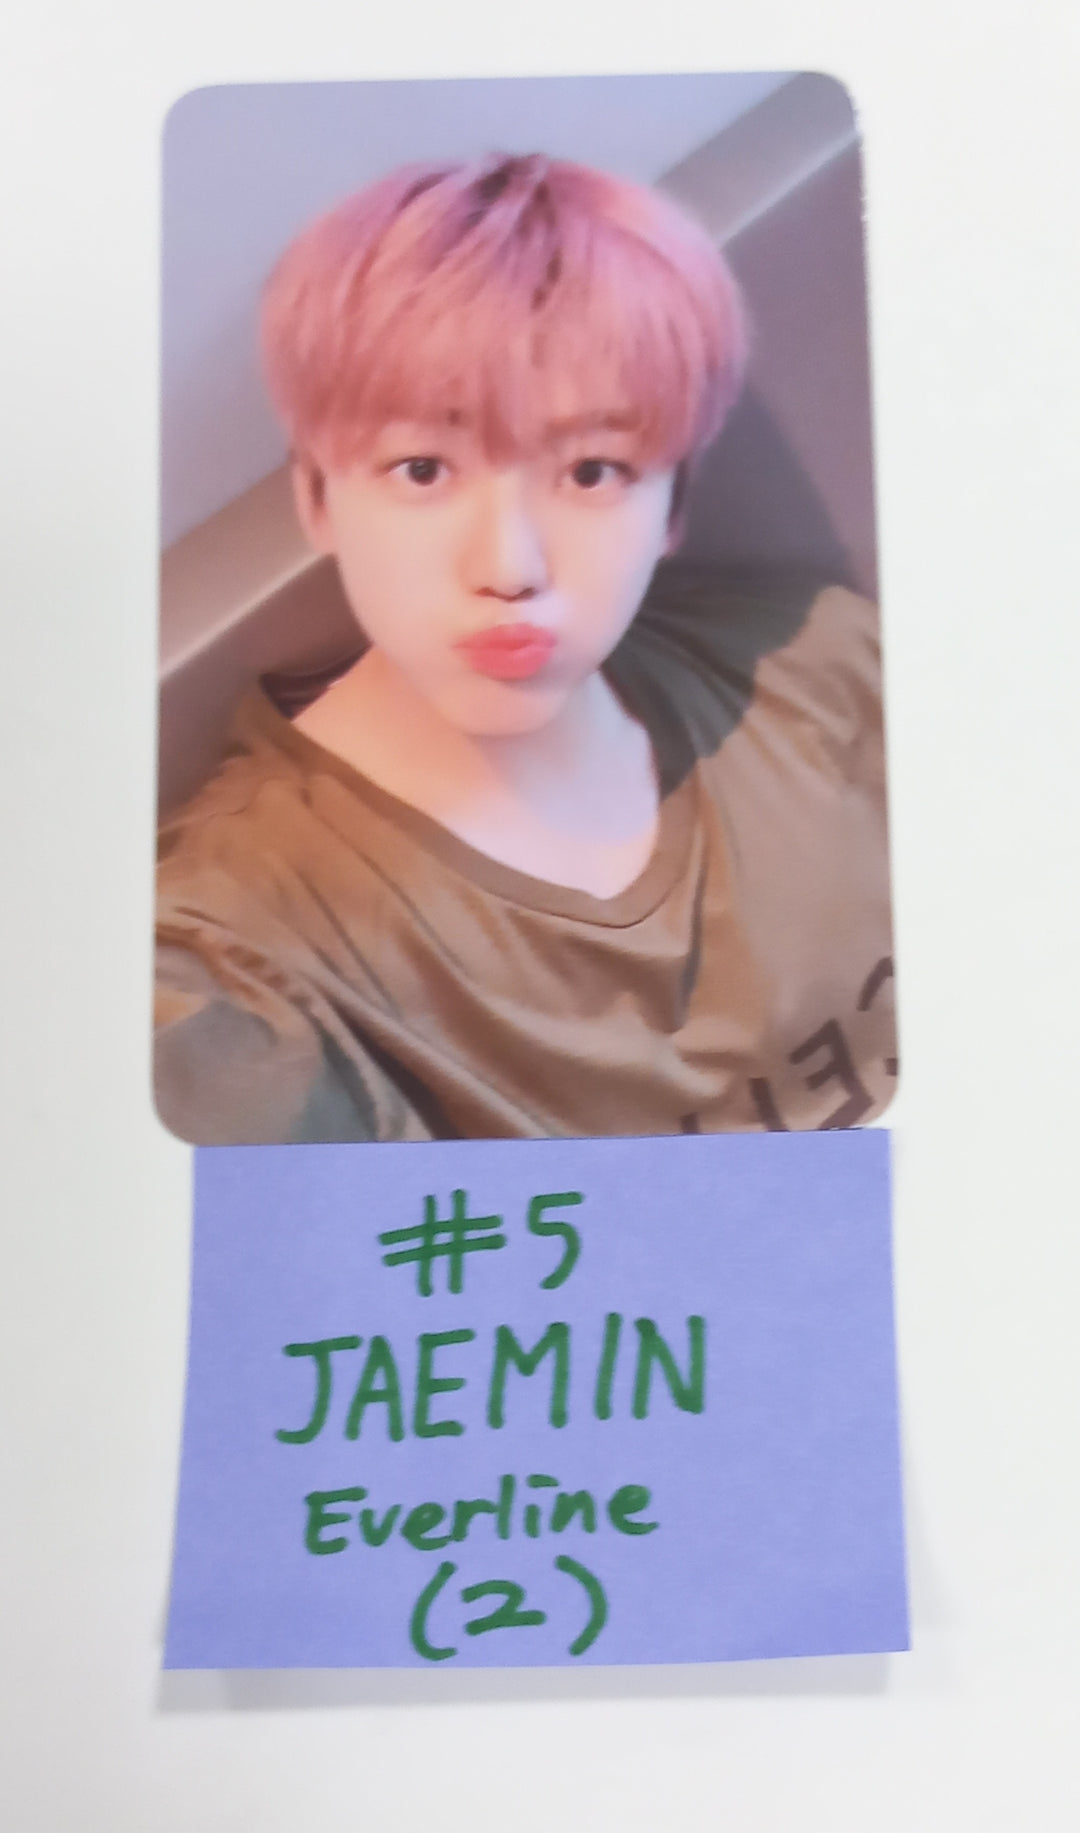 NCT Dream "ISTJ" - Everline Special Event Photocard [23.09.14]